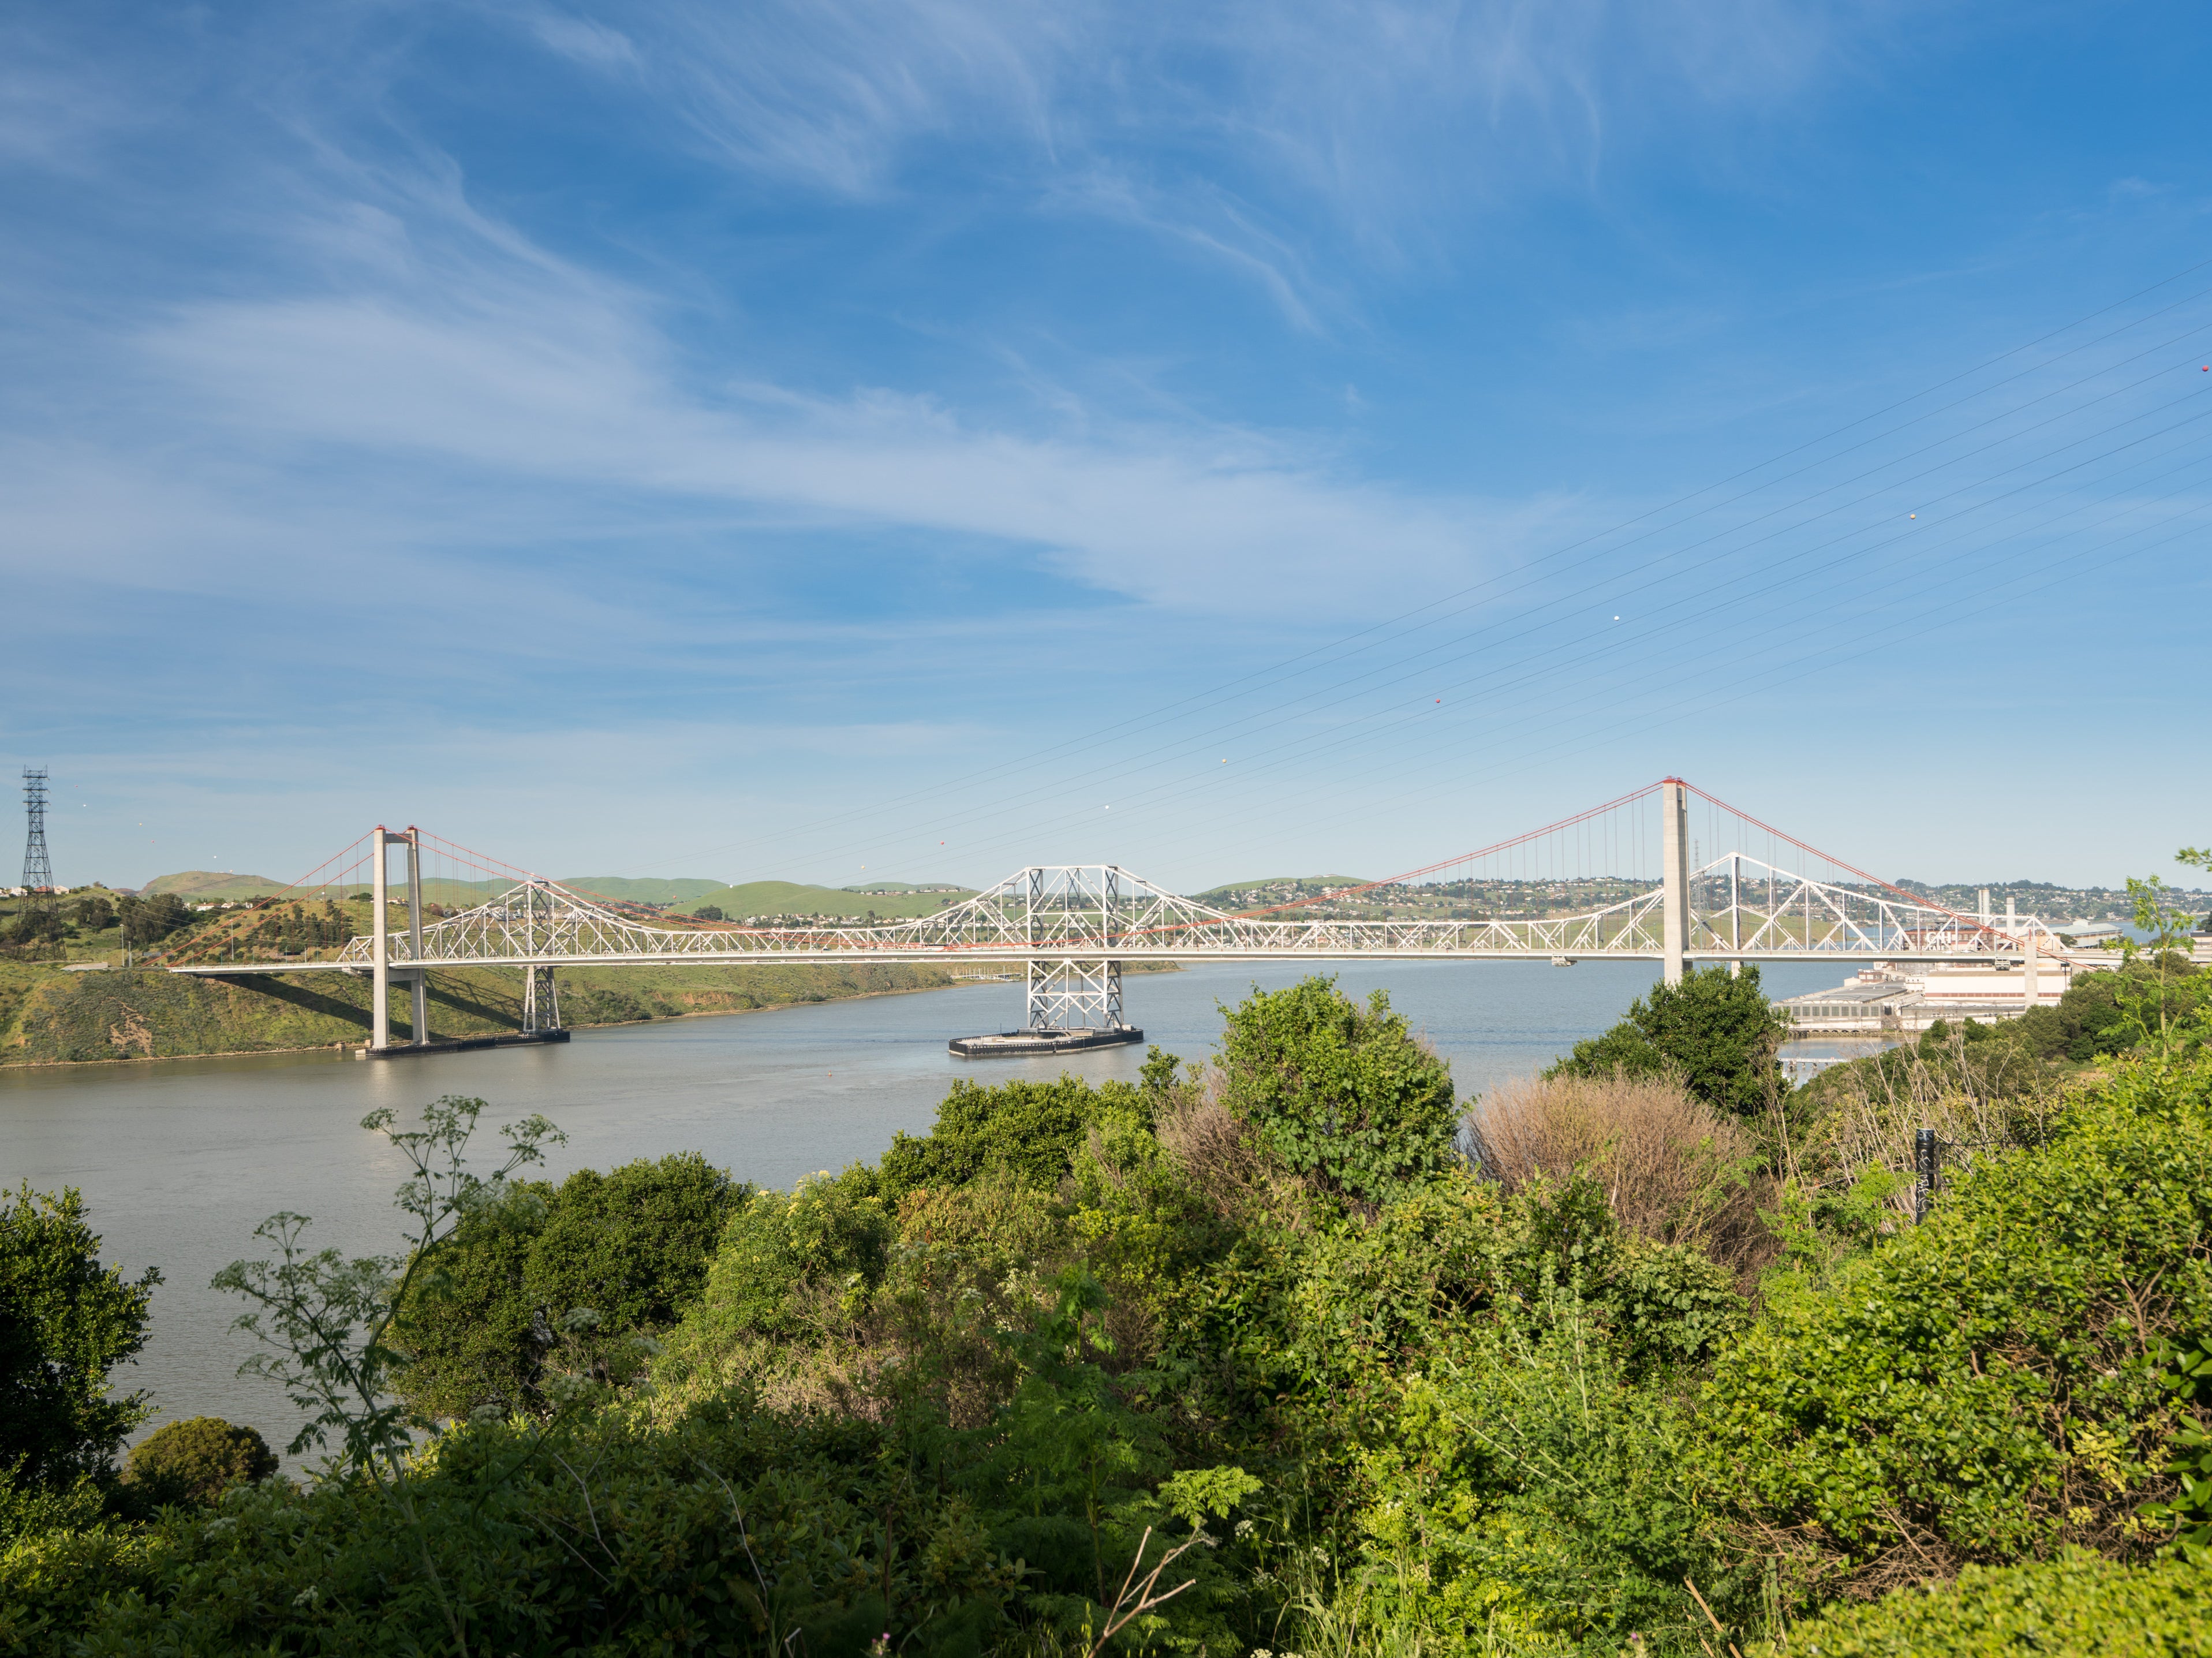 Carquinez Bridge, which leads to Vallejo, where the unfortunate donation was made